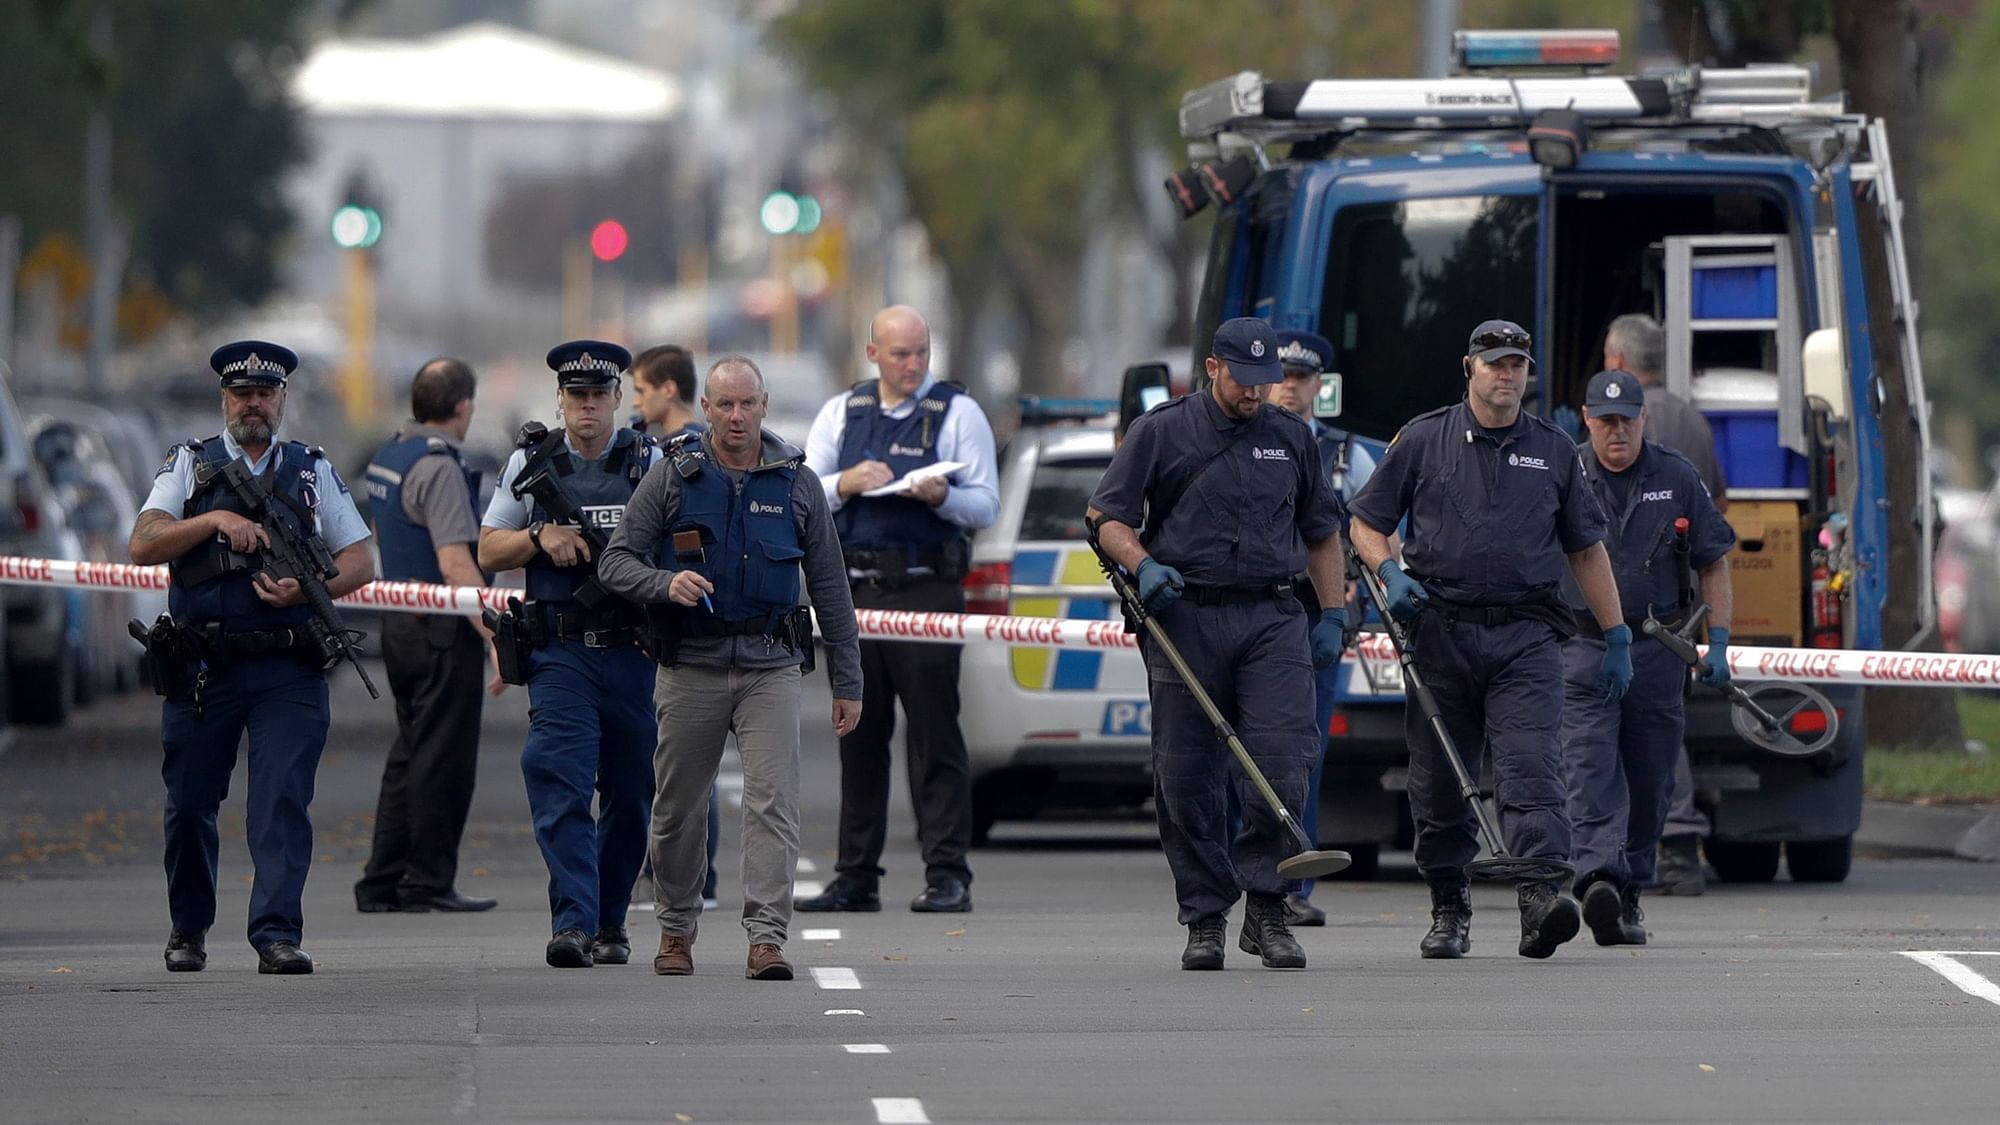 Spot visuals after two mosques were attacked in New Zealand’s Christchurch city on 15 March.